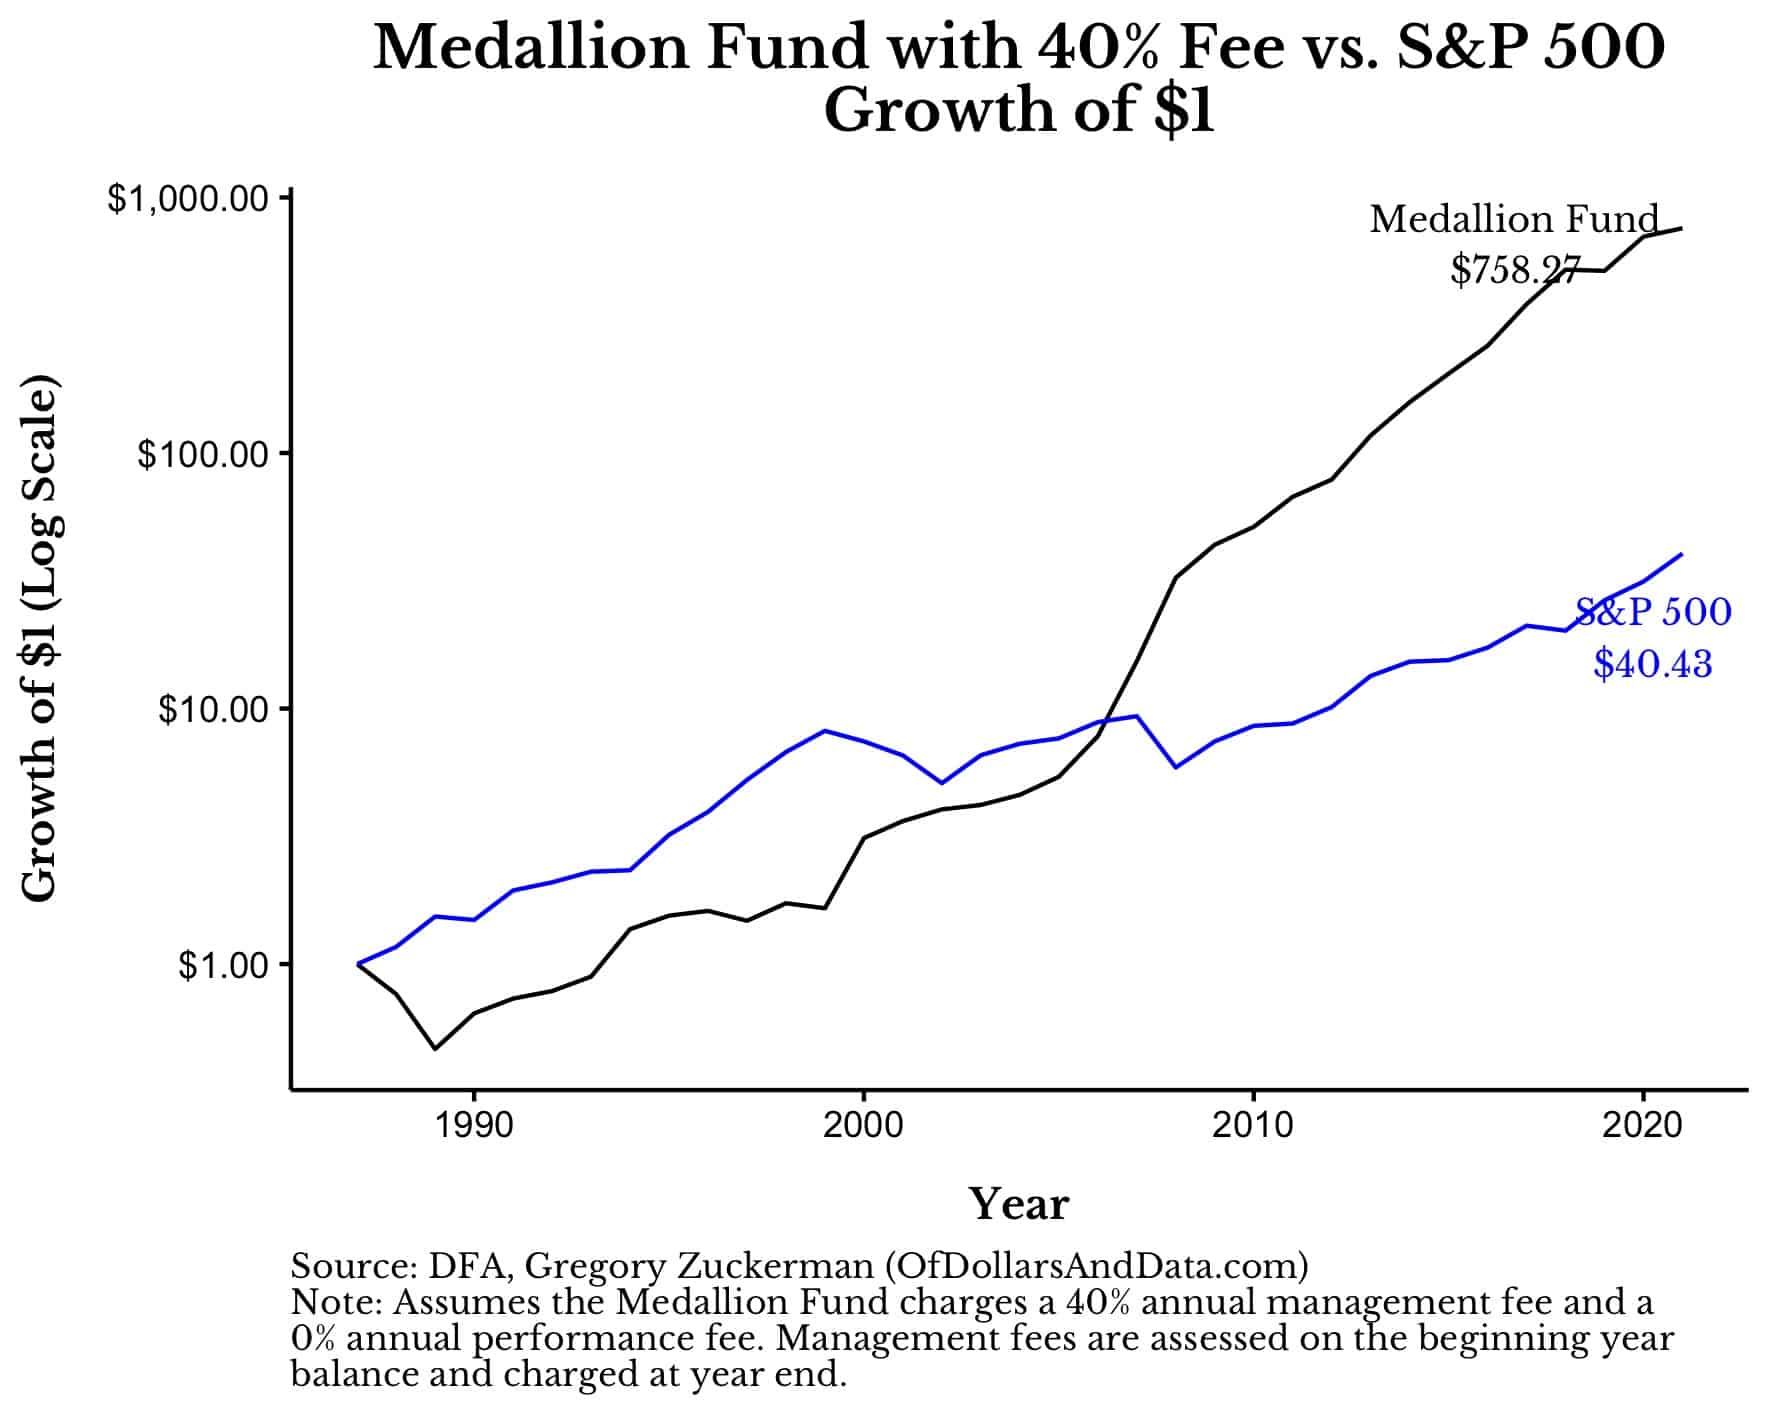 The growth of the Medallion Fund with a 40% fee versus the S&P 500 from the 1988 until 2021.